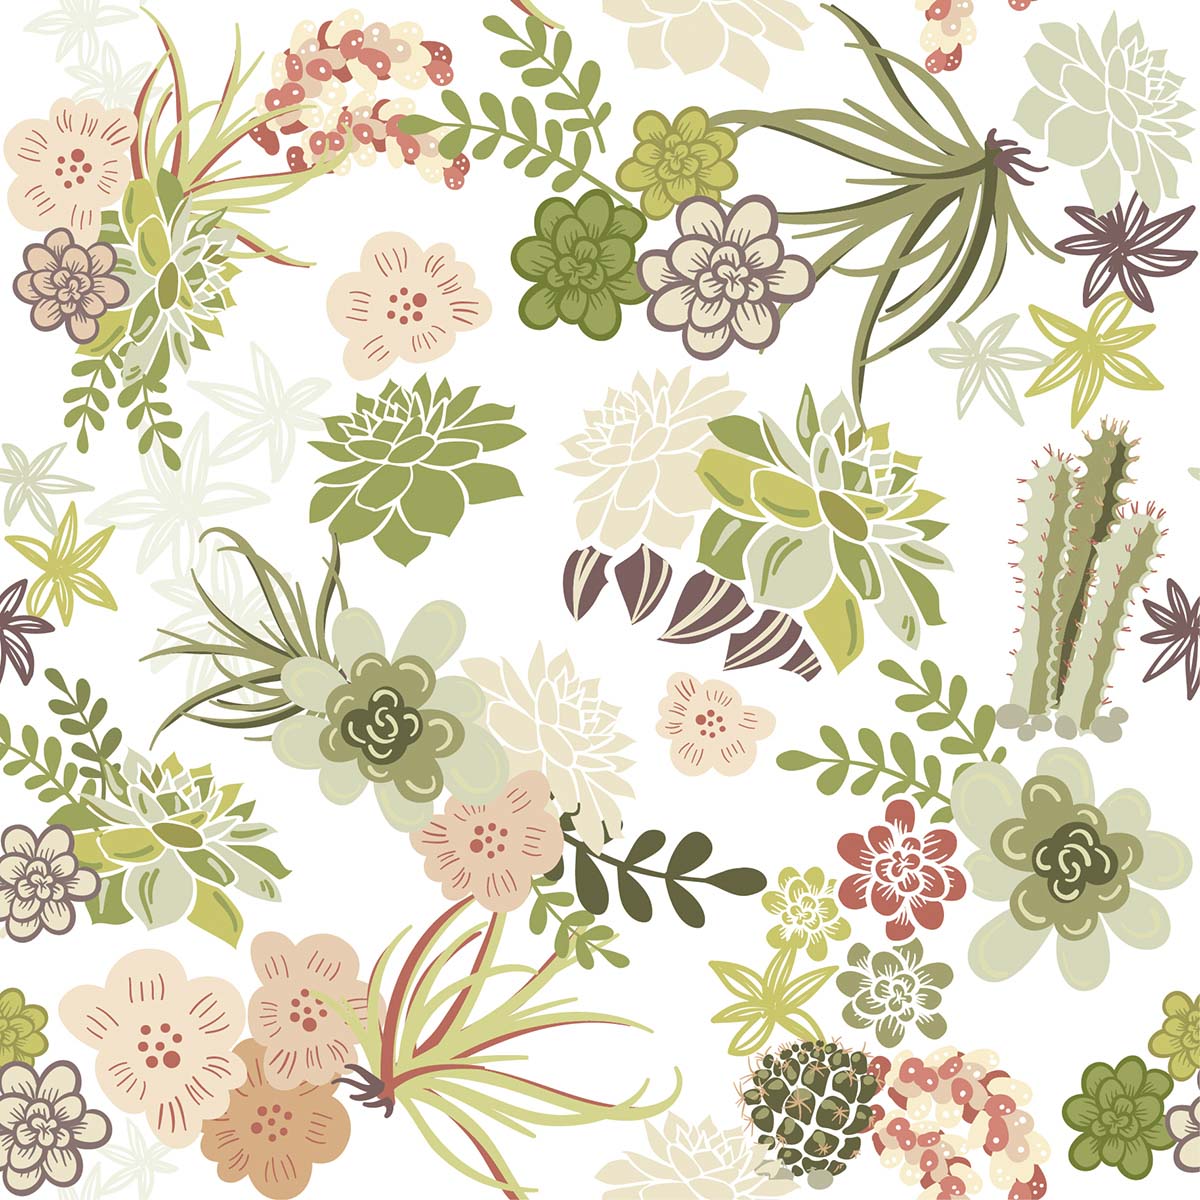 A pattern of flowers and plants